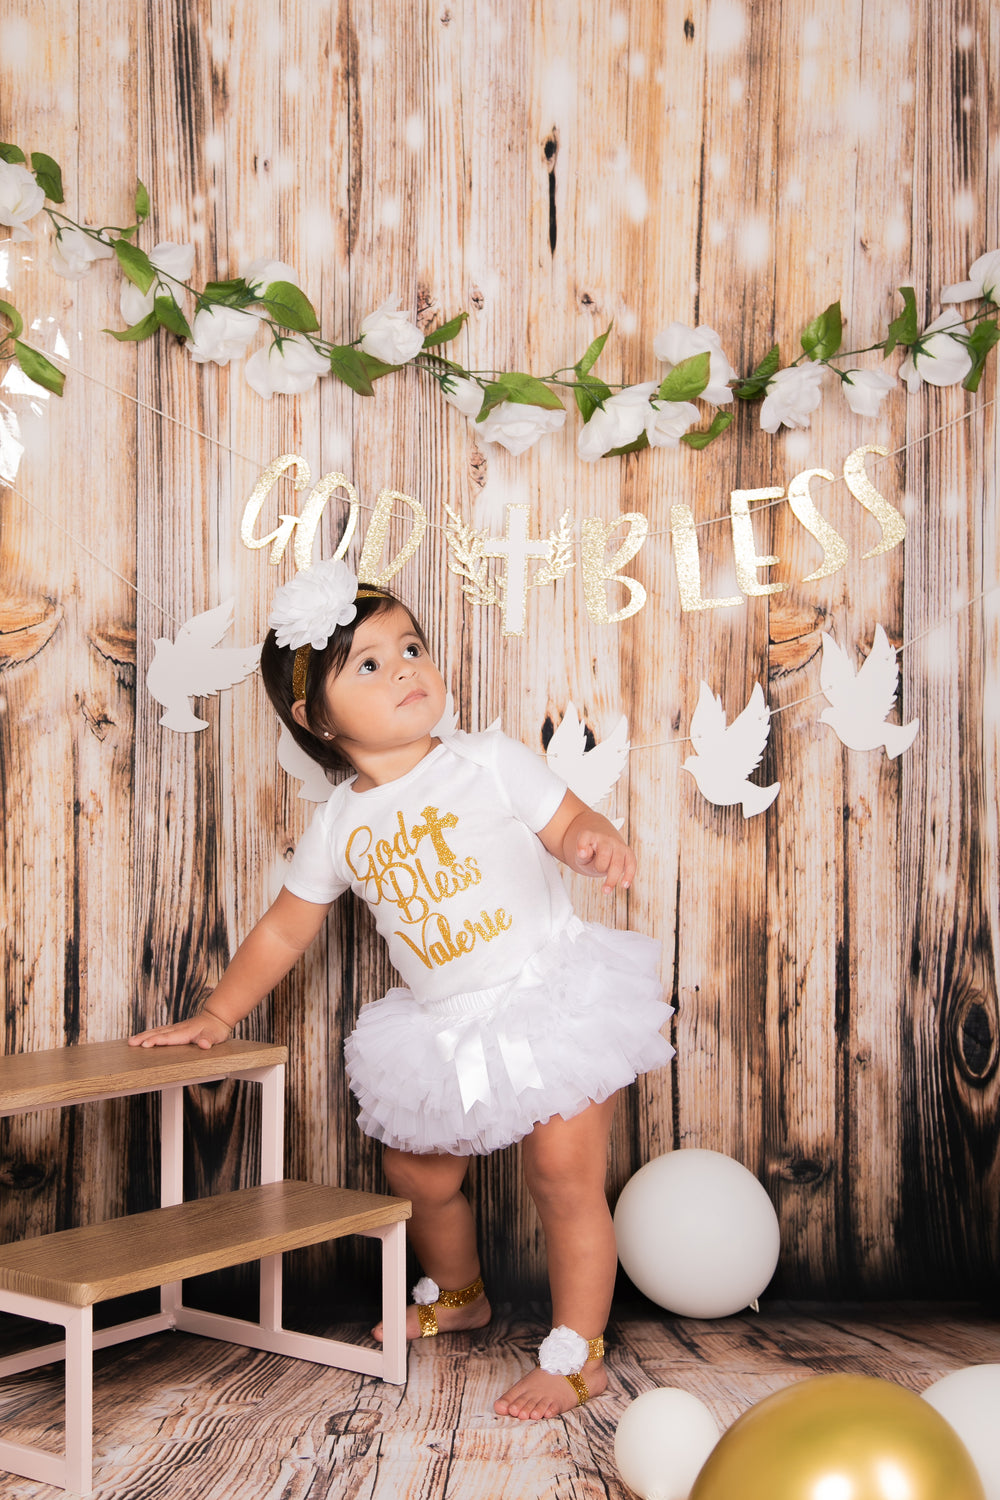 Personalized Baptism Outfit After Party.